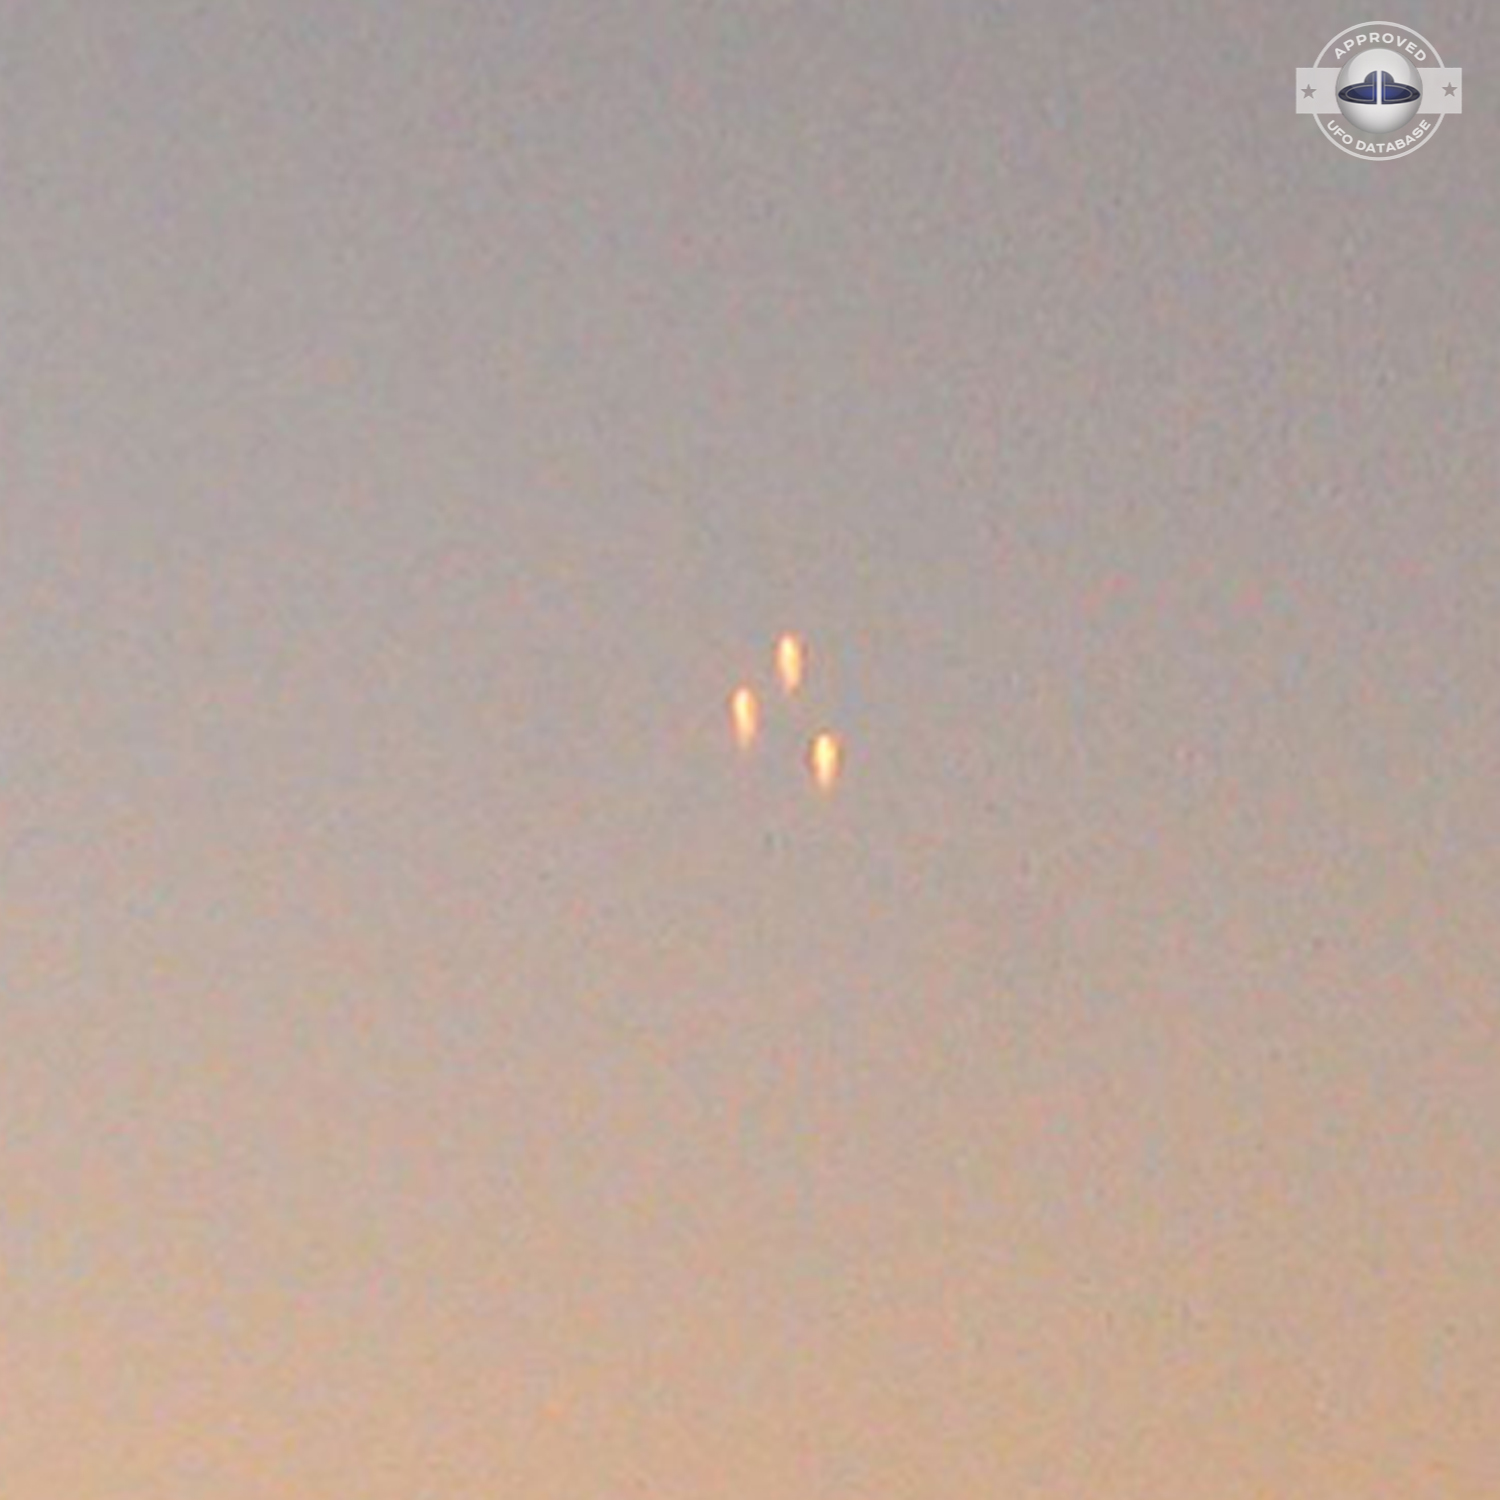 UFO orbs in Triangle formation over Nuclear plant in Pennsylvania 2012 UFO Picture #528-4